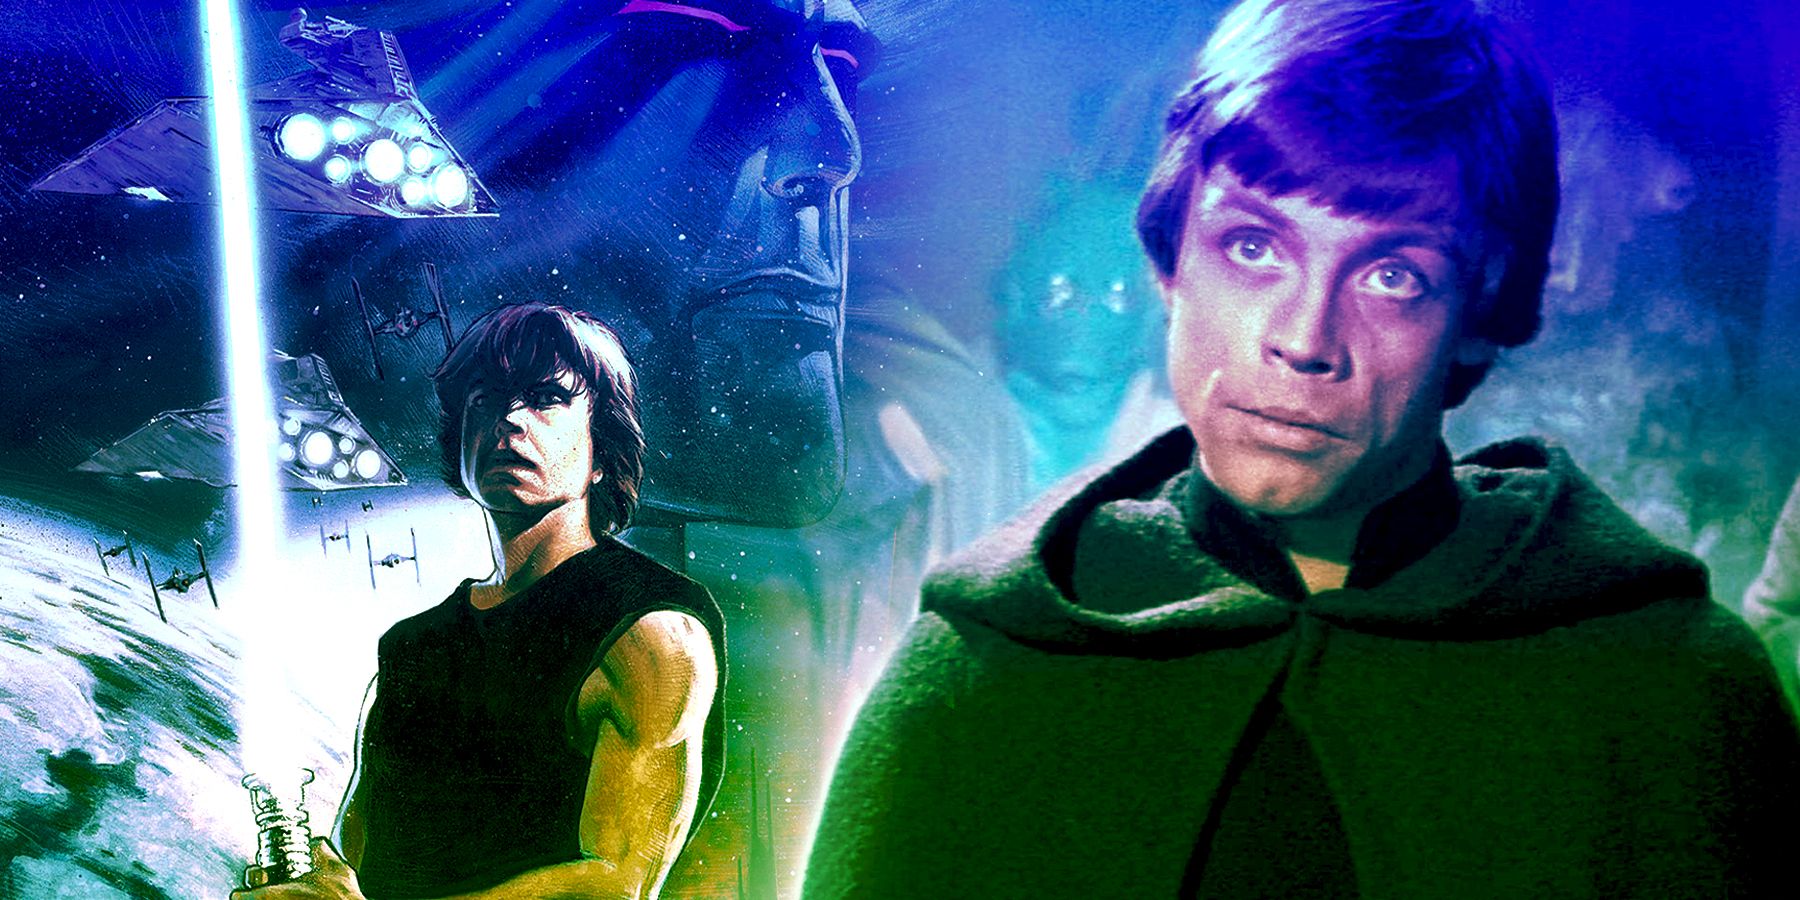 Luke Skywalker in front of the cover of Heir to the Empire.